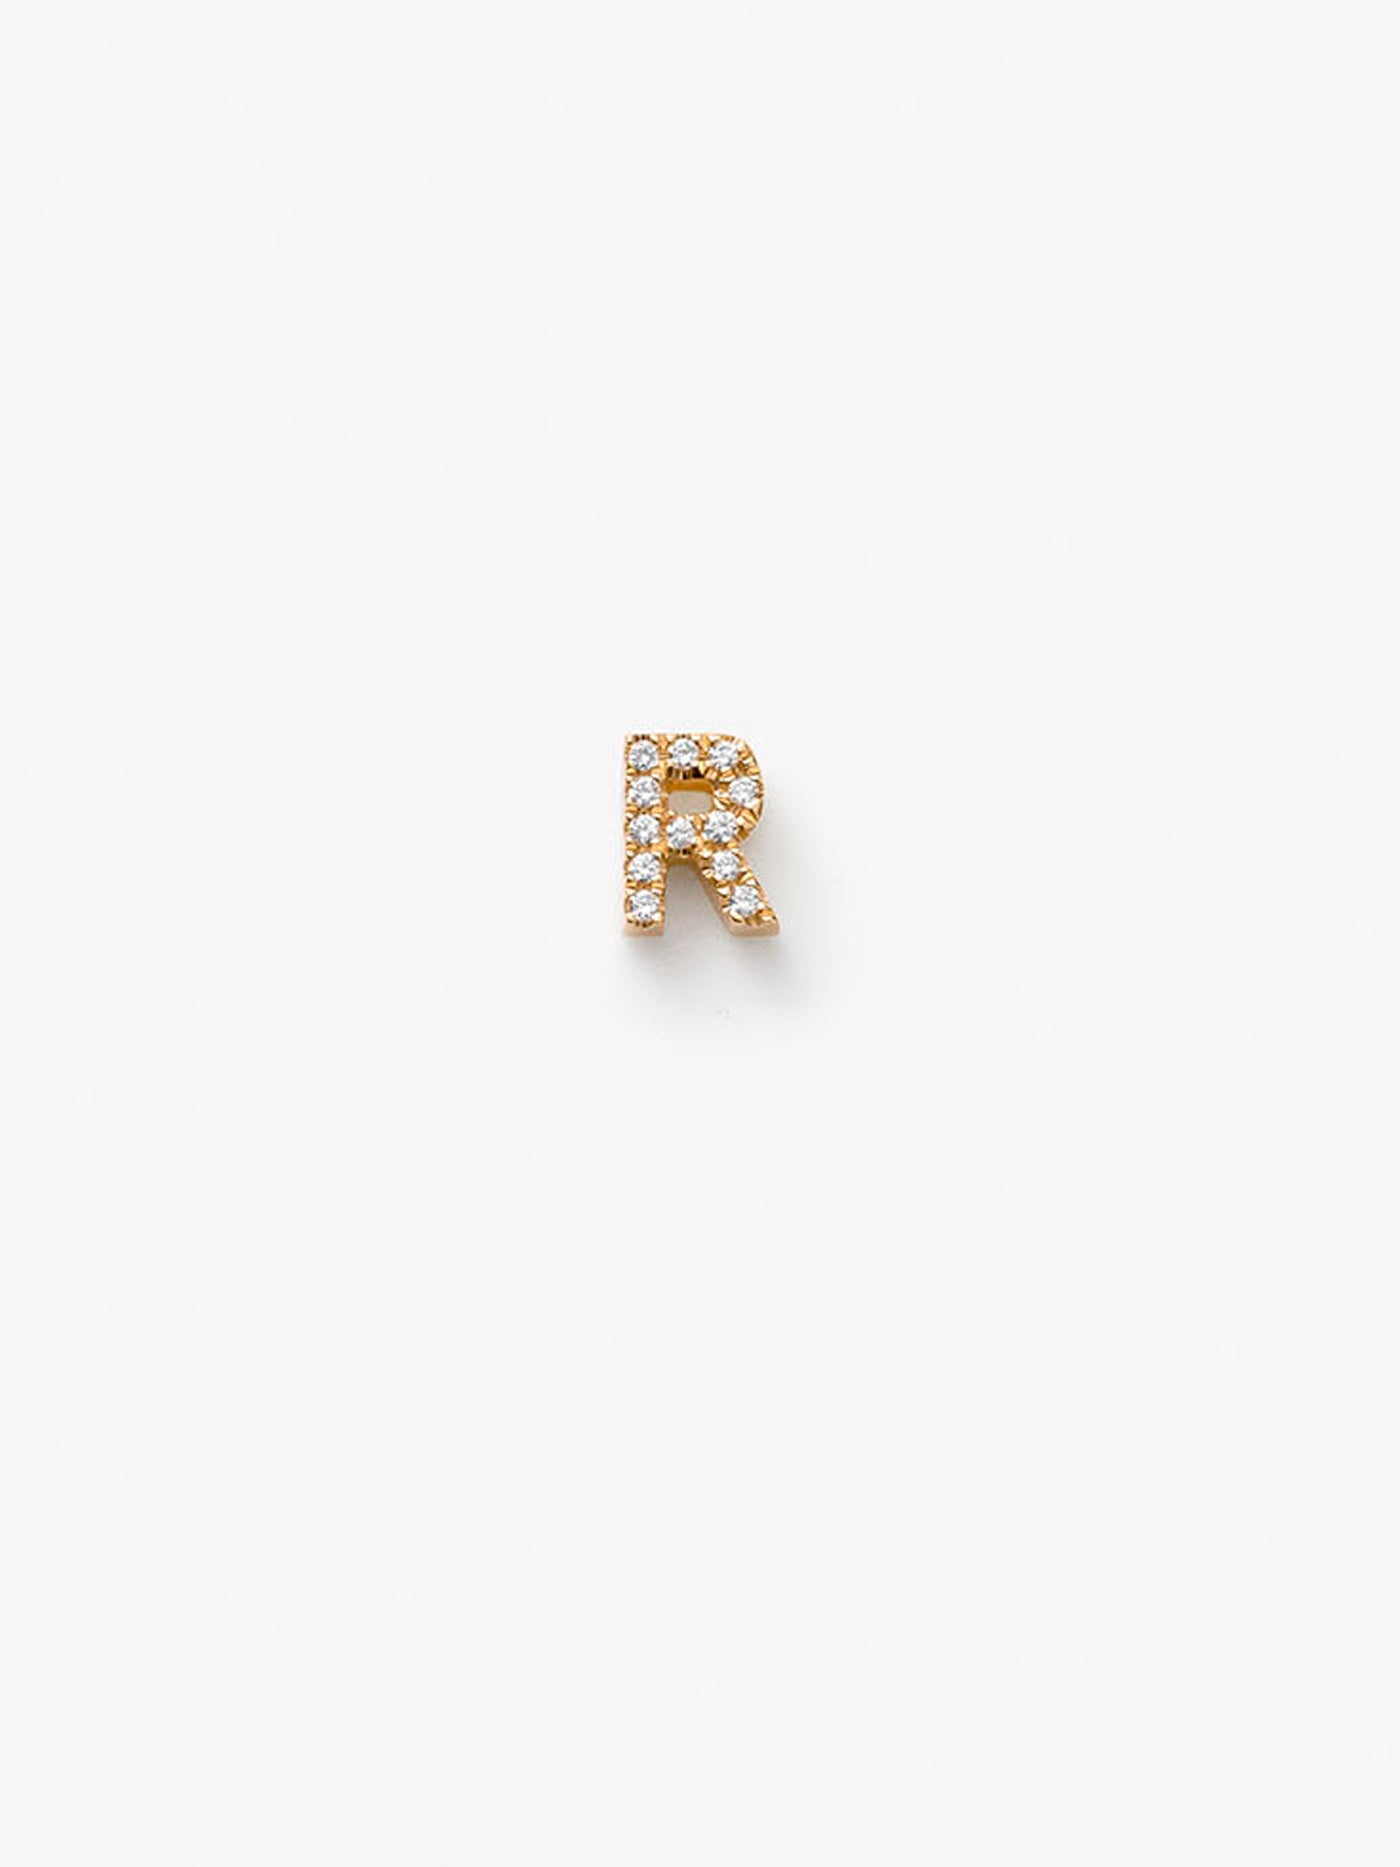 Letter R in Diamonds and 18k Gold